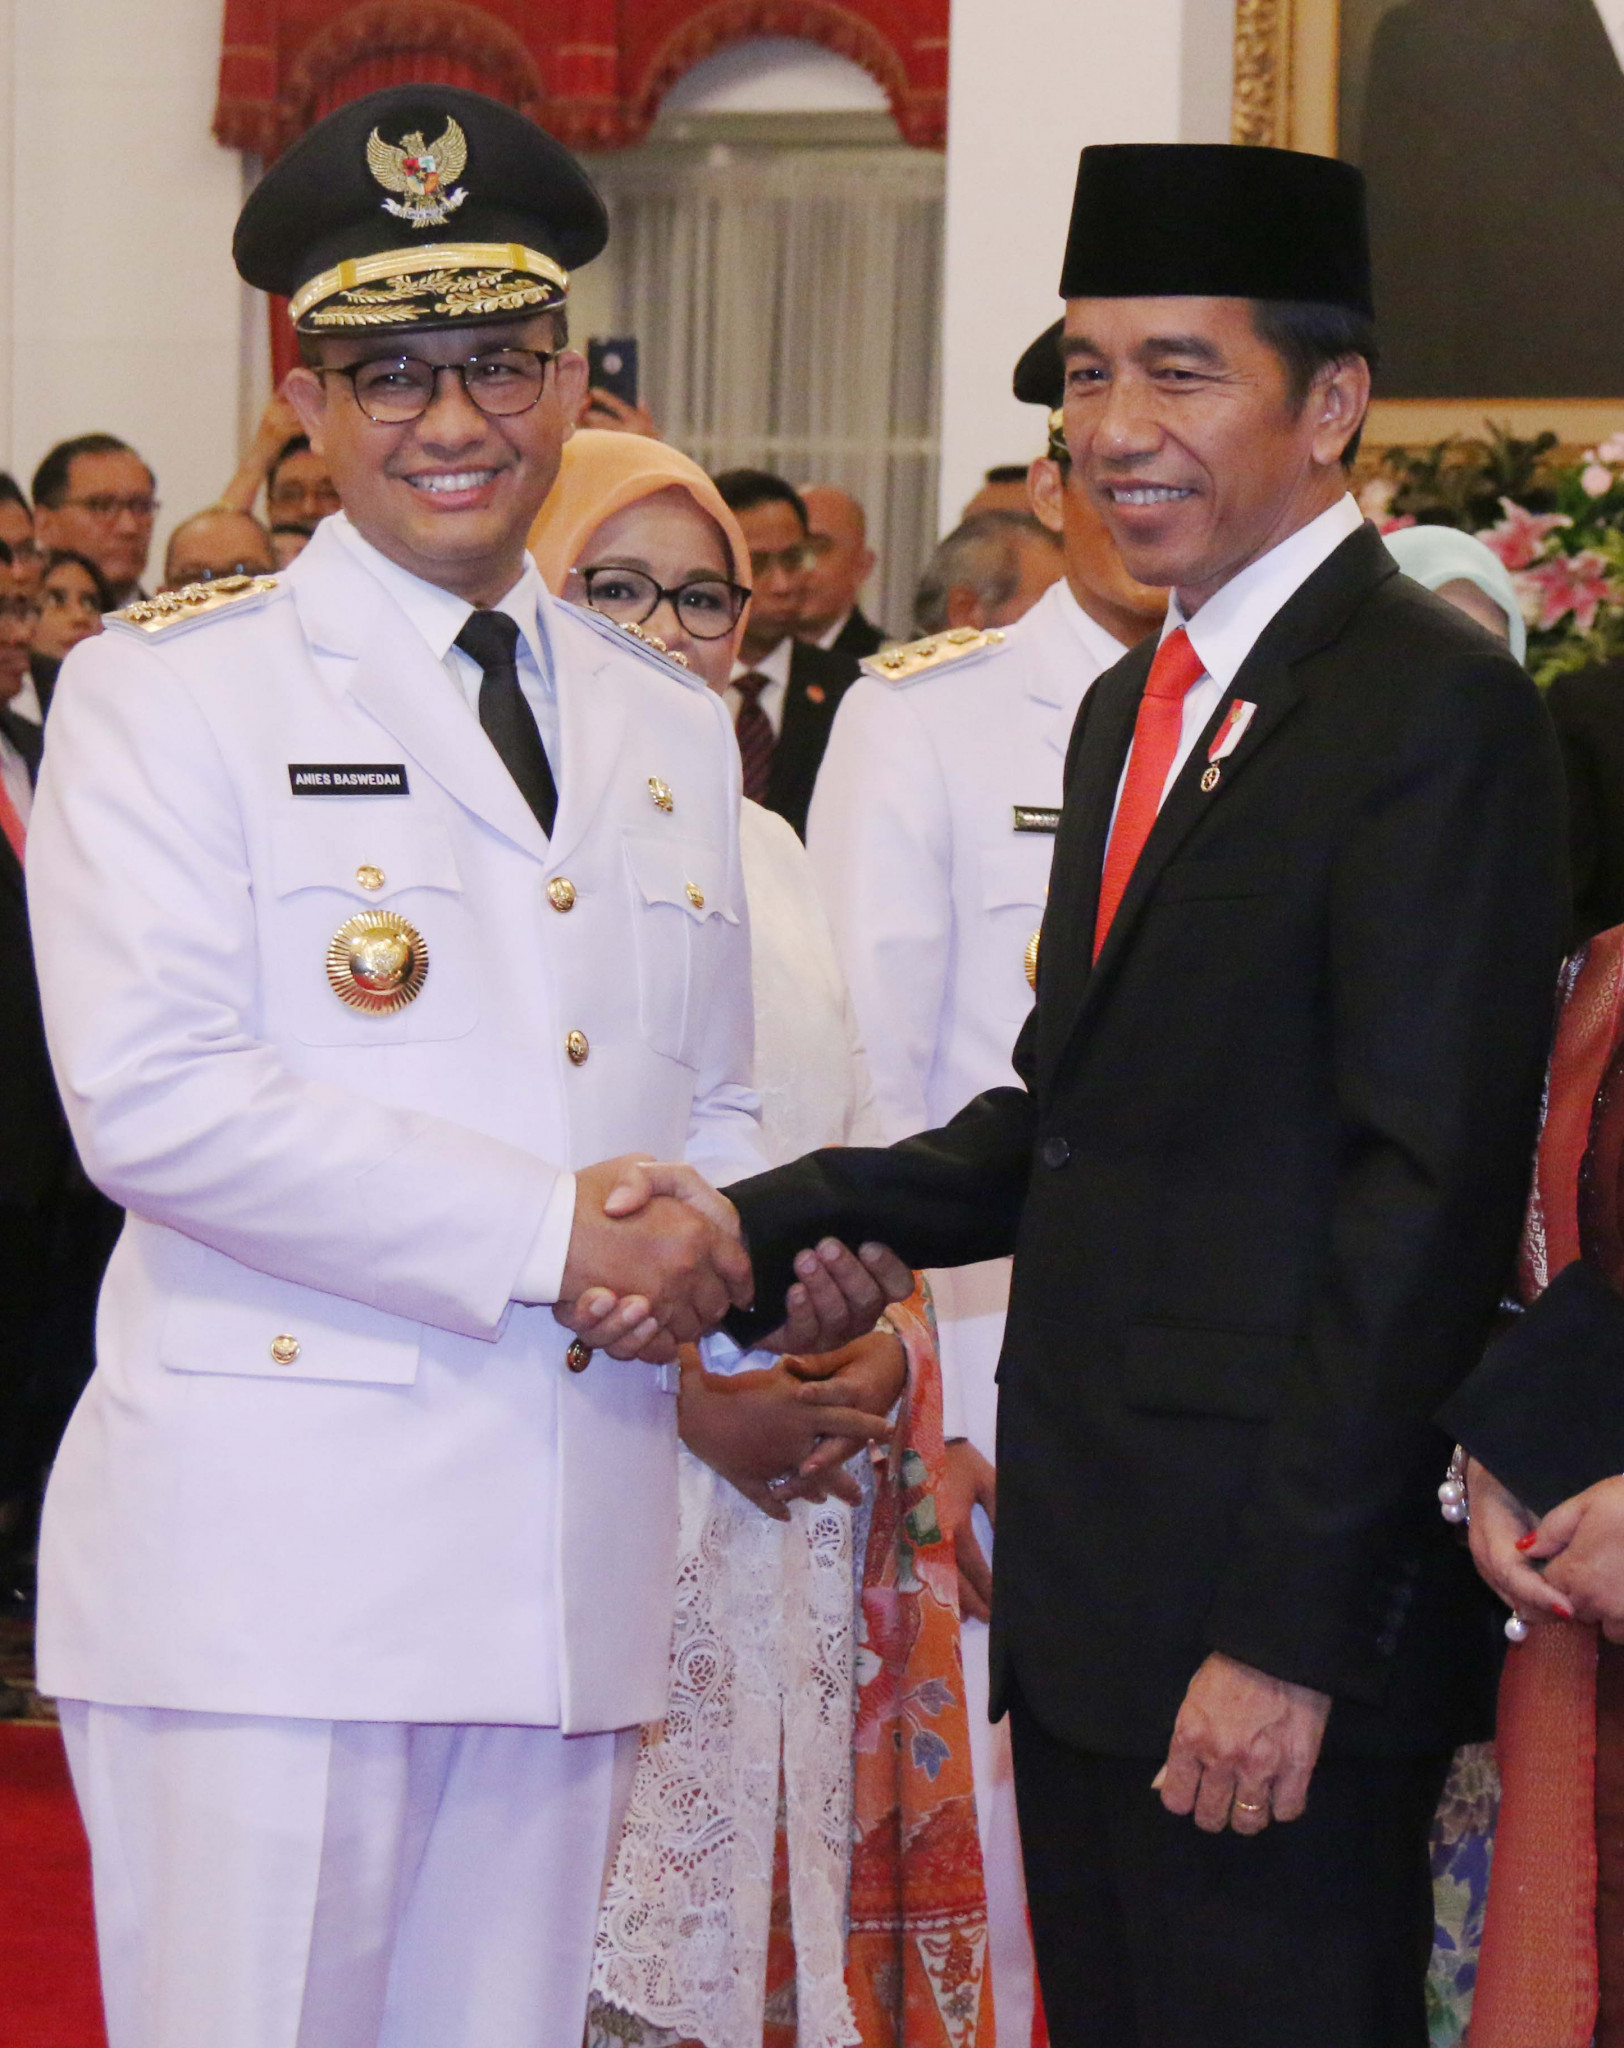 Anies Baswedan, pictured on the left here with Indonesia President Joko Widodo, is the current Governor of Jakarta ©Getty Images